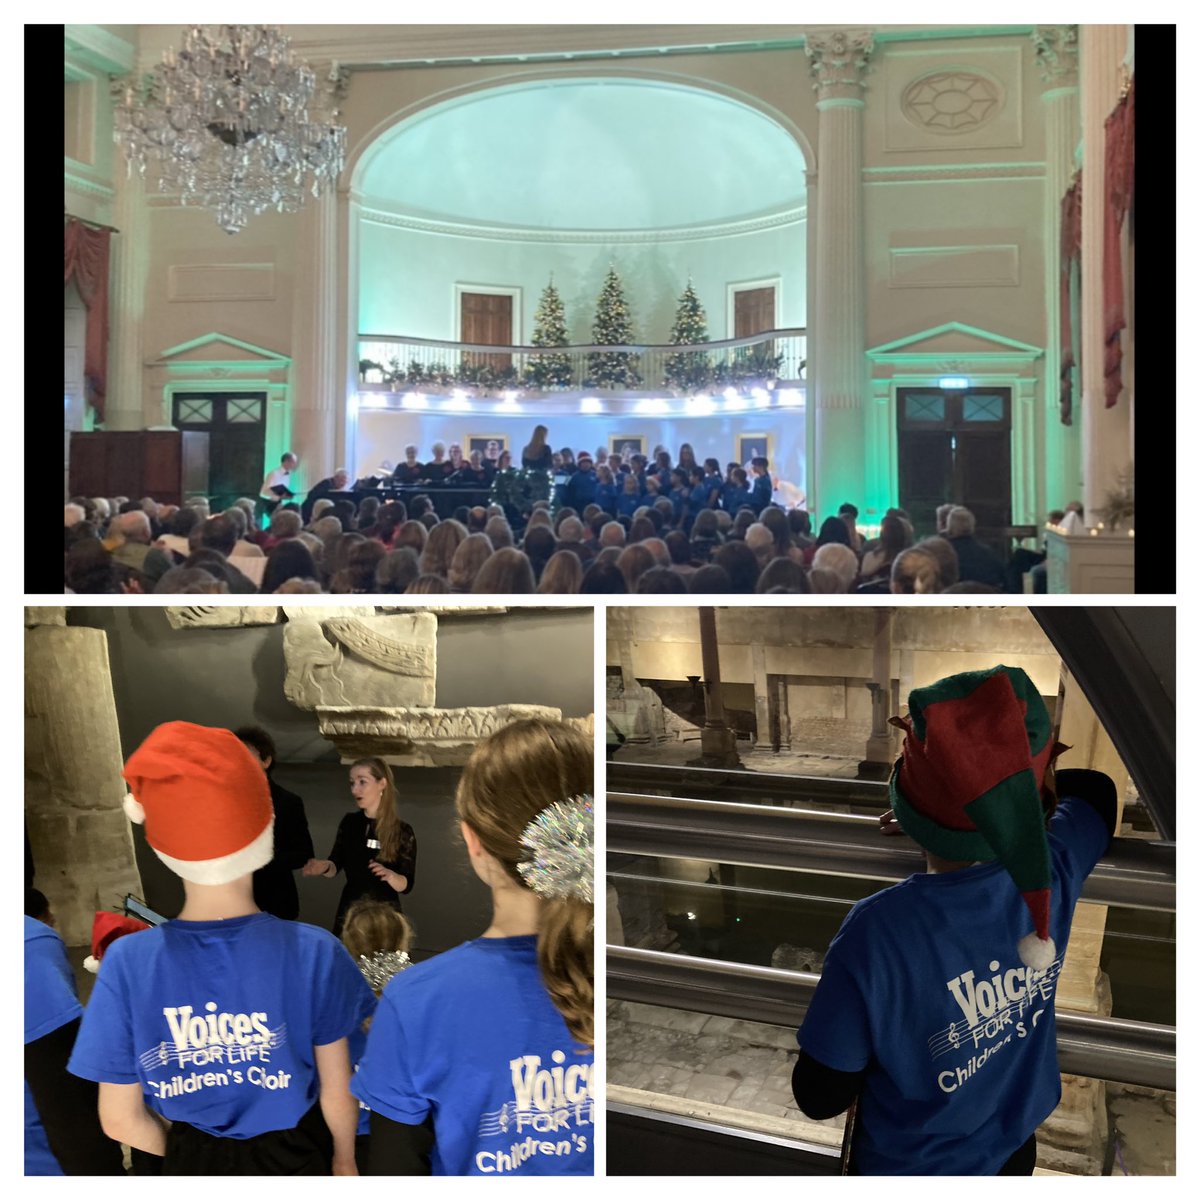 An amazing performance in a beautiful candlelit venue and a green room in the Roman Baths! 👏 The Voices for Life Bath Children’s choir and young champions will be performing again with @BathBachChoir tomorrow at 7pm at the Pump Rooms.